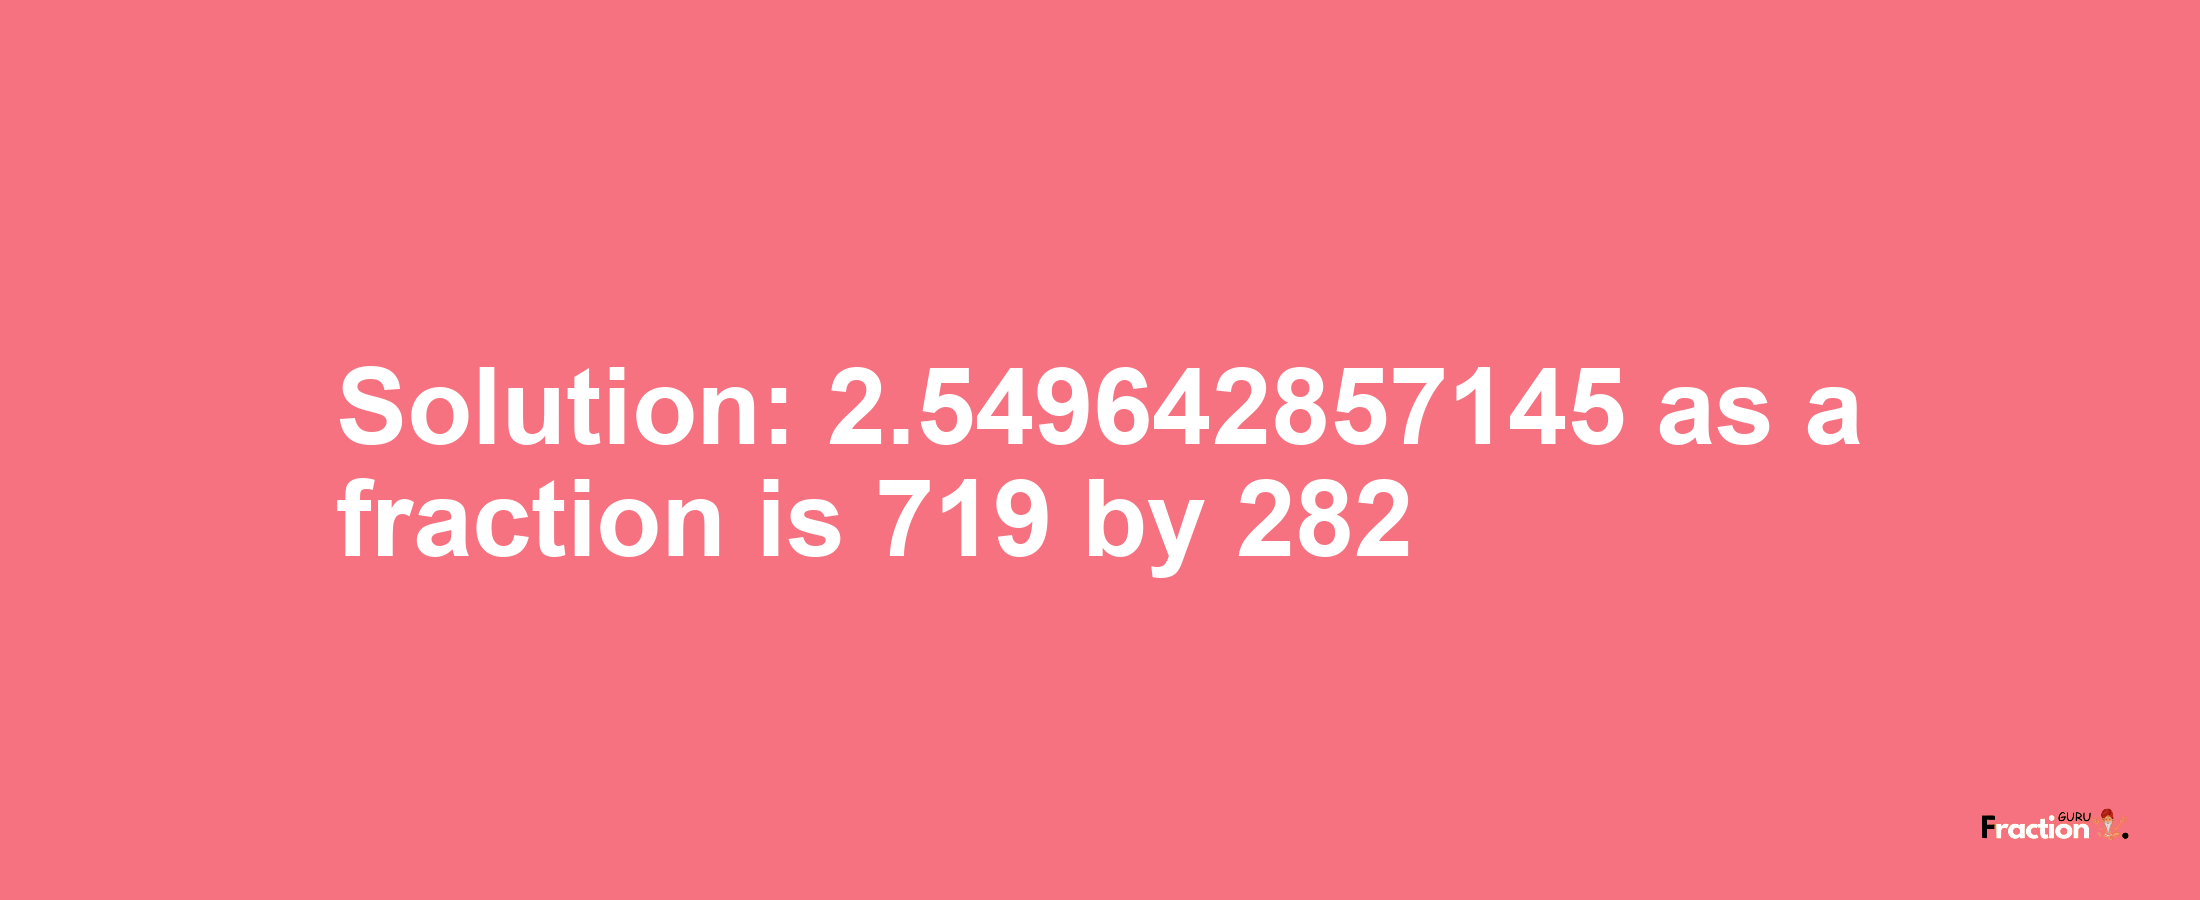 Solution:2.549642857145 as a fraction is 719/282